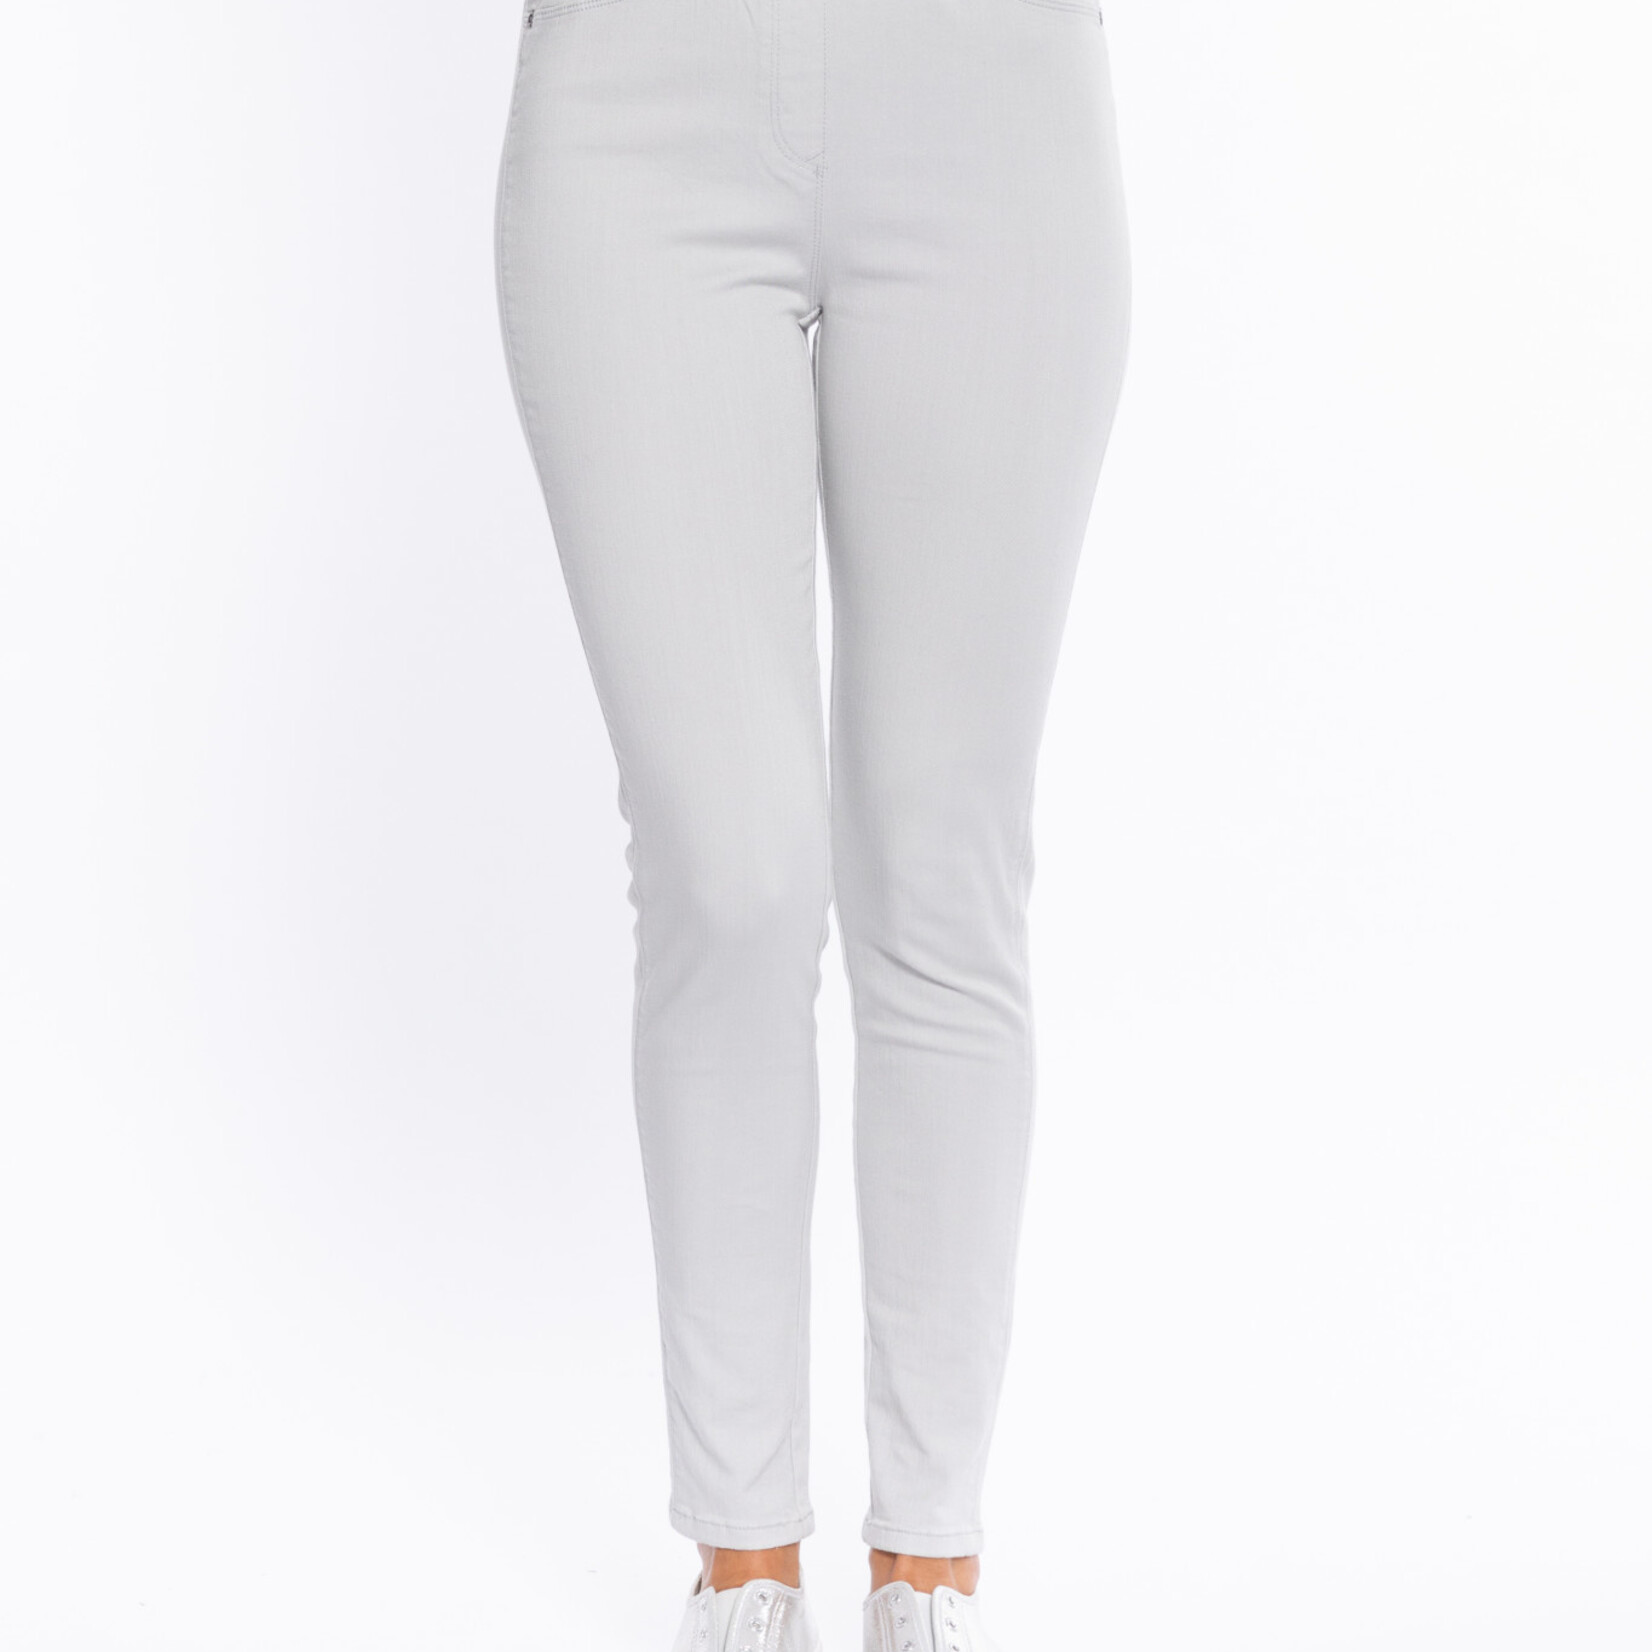 Cafe Latte Stone Cotton Fitted Leg Jeggings